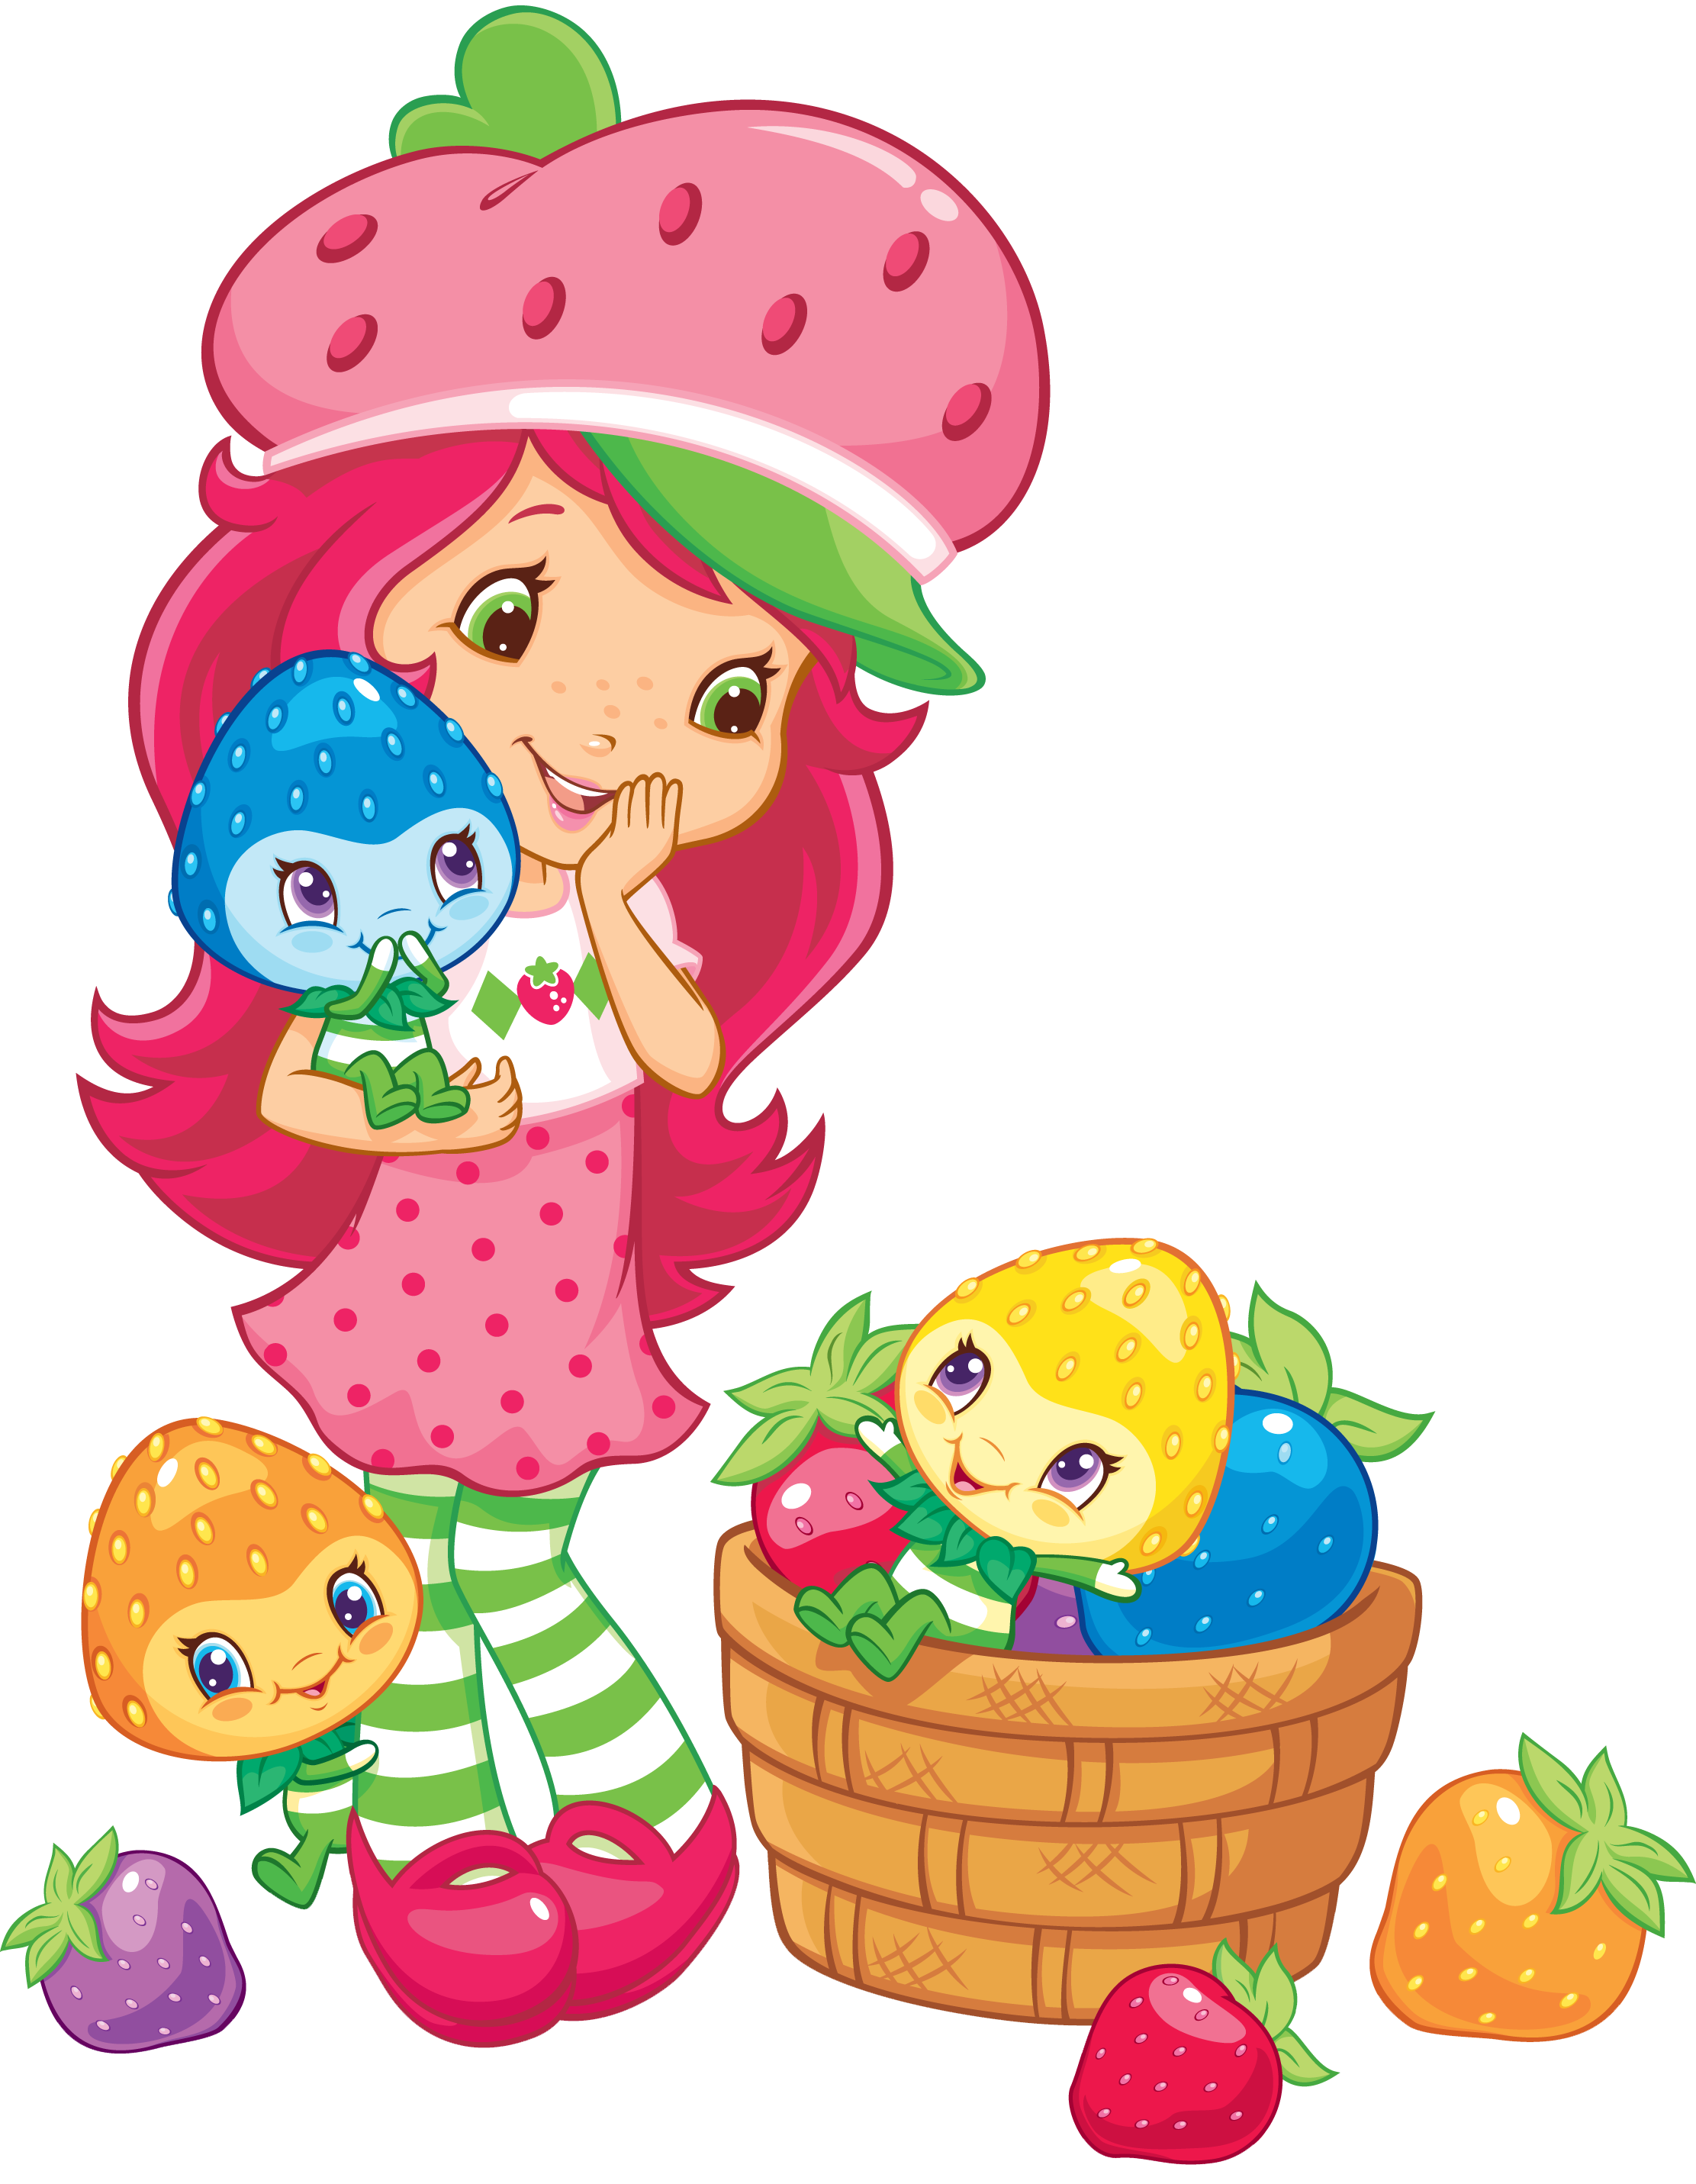 names of the strawberry shortcake characters